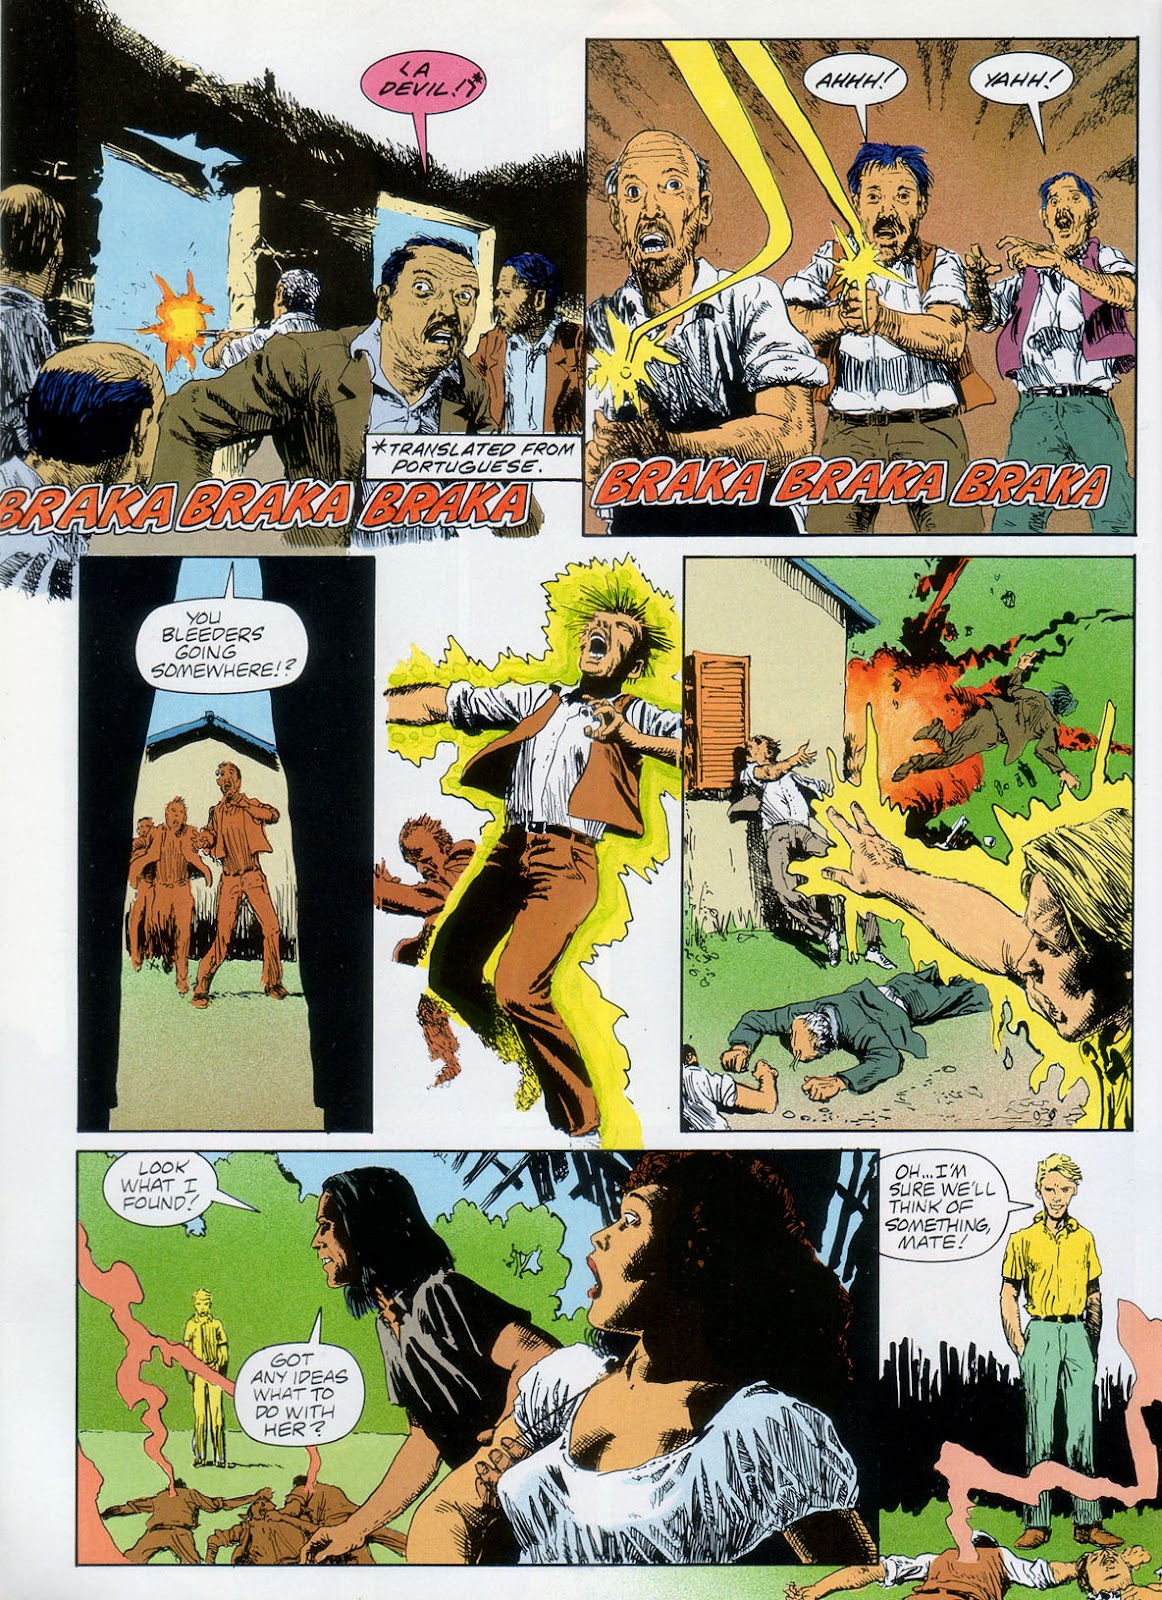 Marvel Graphic Novel issue 57 - Rick Mason - The Agent - Page 36